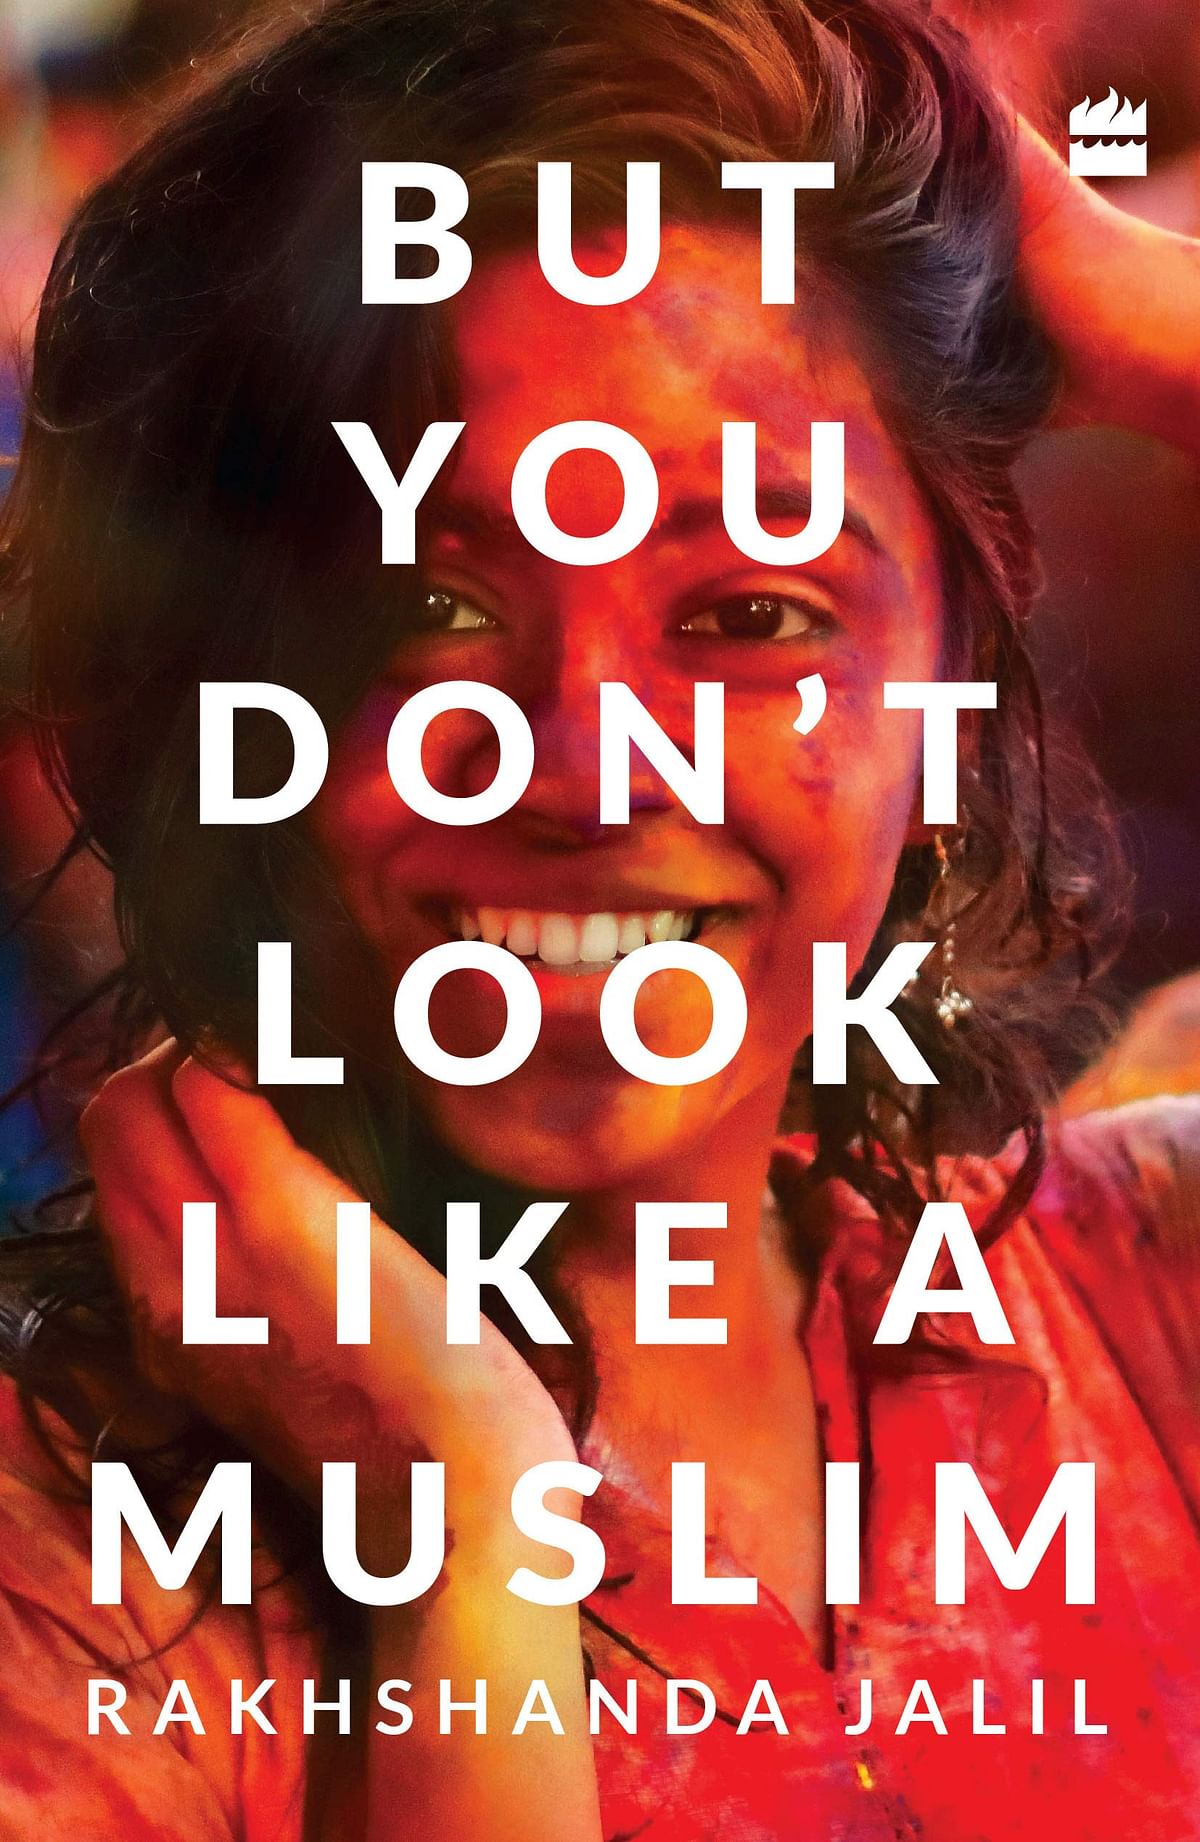 The Quint presents an excerpt from Rakhshanda Jalil’s latest book ‘But You Don’t Look Like A Muslim’.